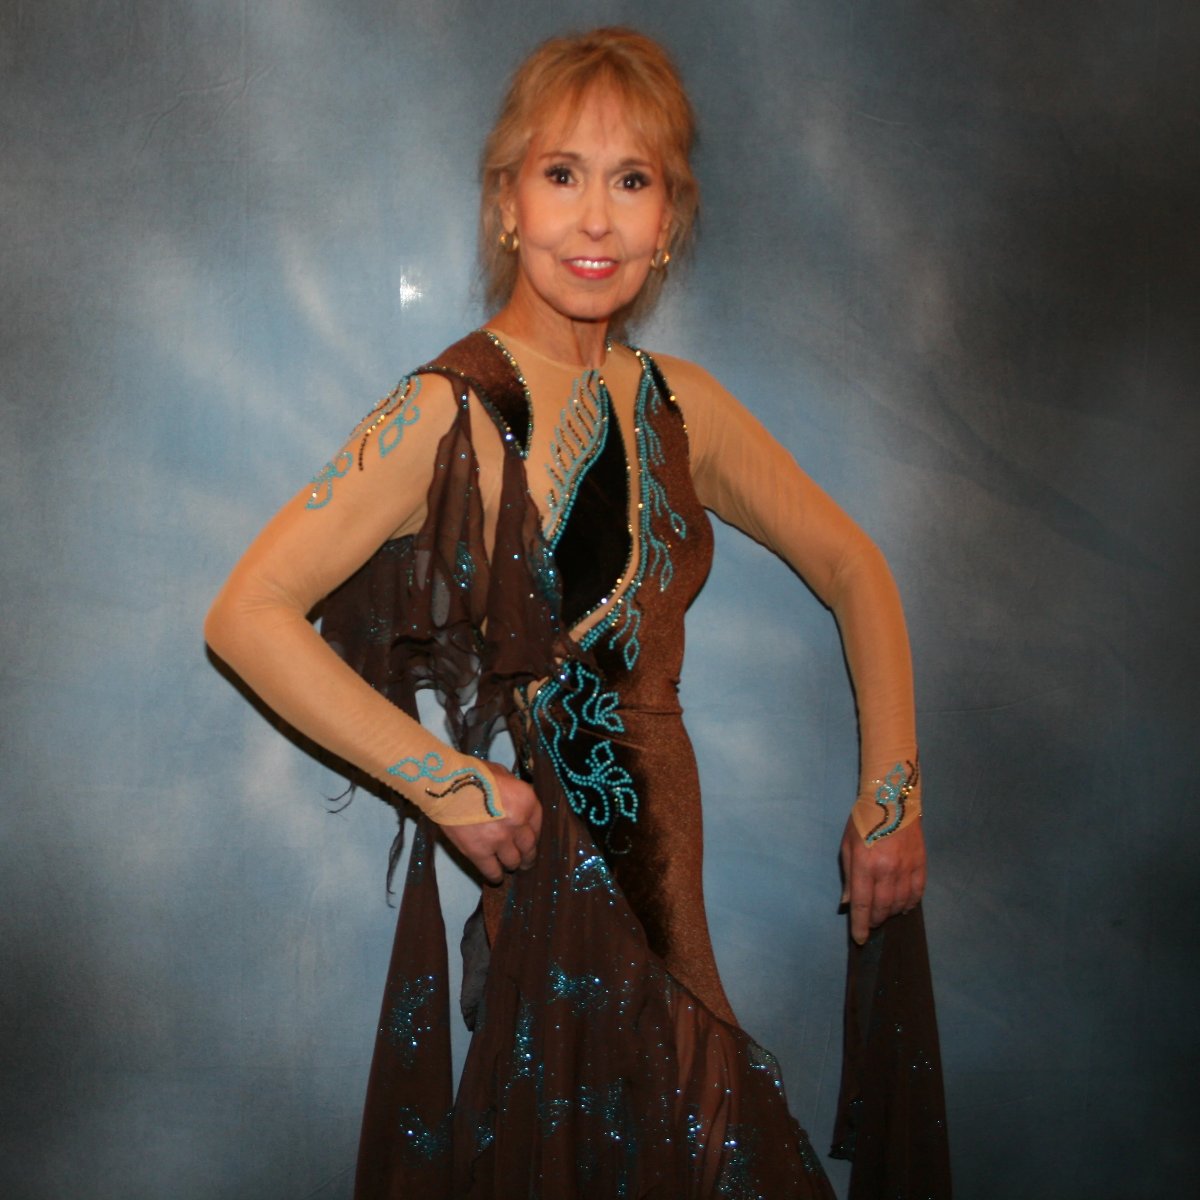 Crystal's Creations close up view of Exquisite brown ballroom dance dress with turquoise accents was created in luxurious chocolate brown stretch velvet on a nude illusion base…featuring billowing yards of brown chiffon petal panels with glittery turquoise butterflies. 